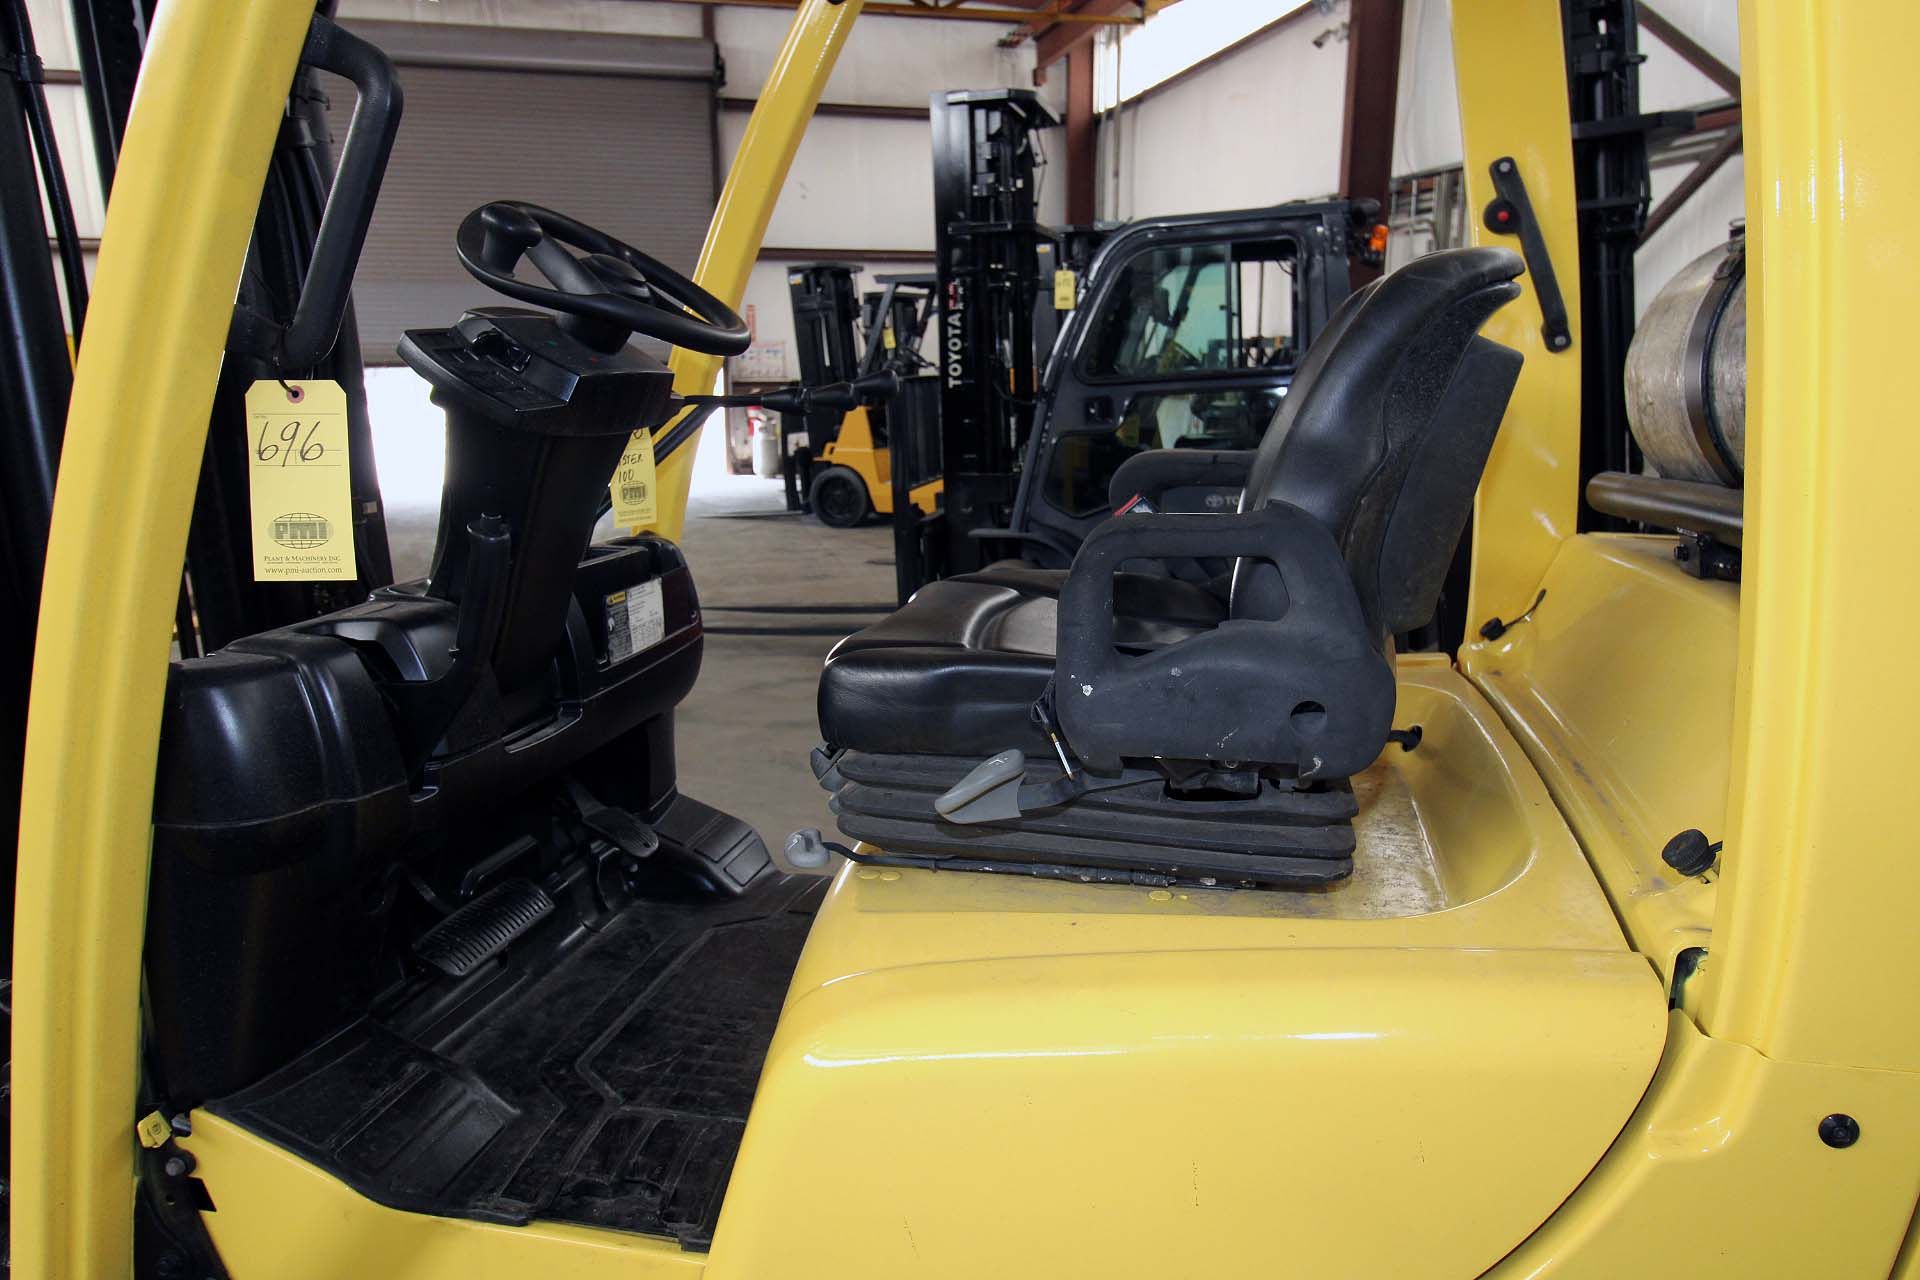 FORKLIFT, HYSTER 10,000 LB. BASE CAP. MDL. S100FT, new 2014, LPG, 88" 2-stage mast, 133" lift ht., - Image 5 of 7